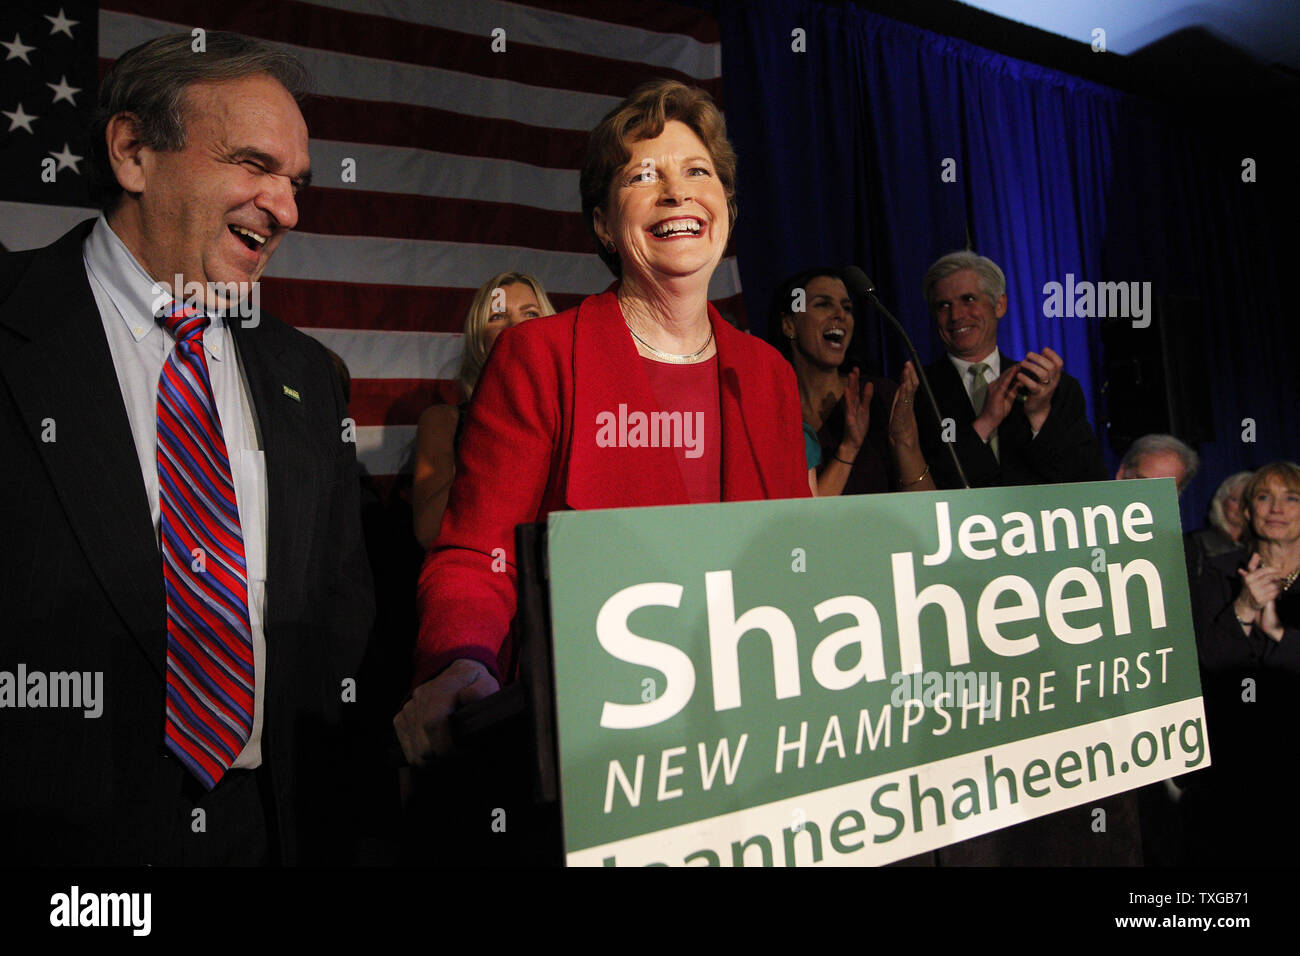 Jeanne Shaheen, incumbent Democratic U.S. Senator in New Hampshire, (R) celebrates with husband Bill Shaheen (L) celebrate her midterm election win over Republican candidate Scott Brown at her election night rally at the Puritan Convention Center in Manchester, New Hampshire on November 4, 2014.    UPI/Matthew Healey Stock Photo